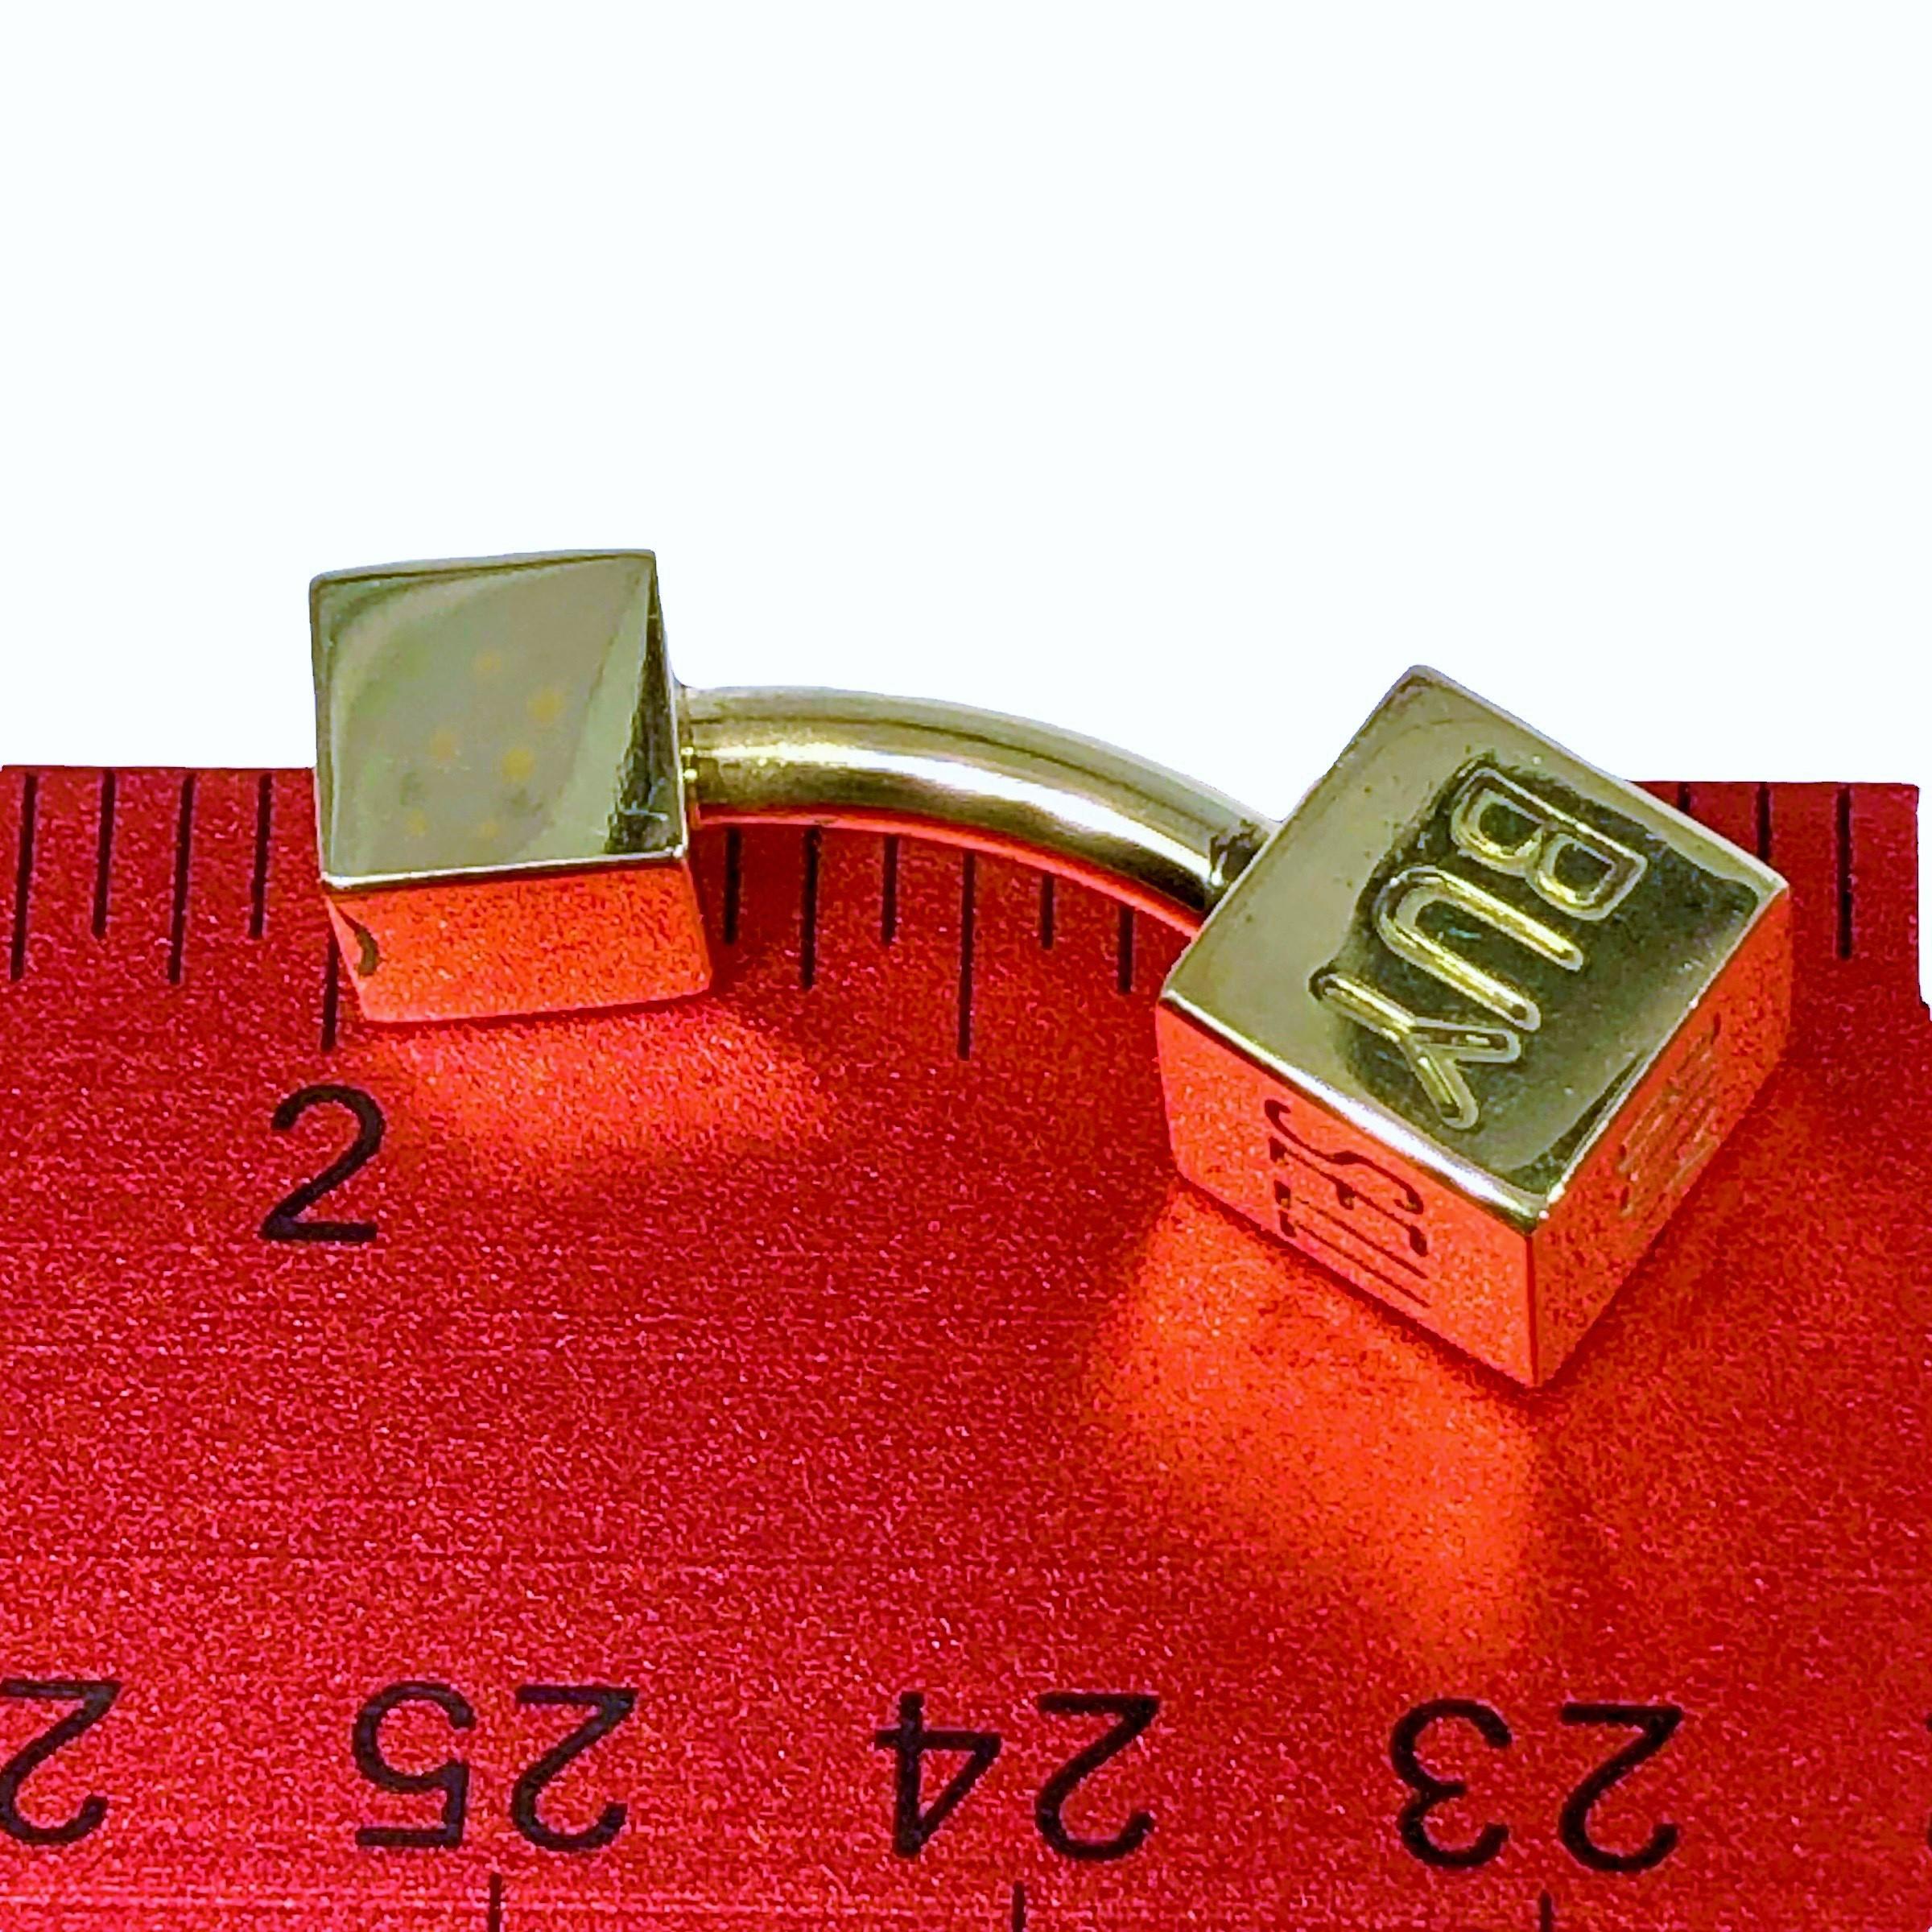 Tiffany 18K Yellow Gold Stock Broker's Cuff links, Buy, Sell, Hold In Good Condition For Sale In Palm Beach, FL